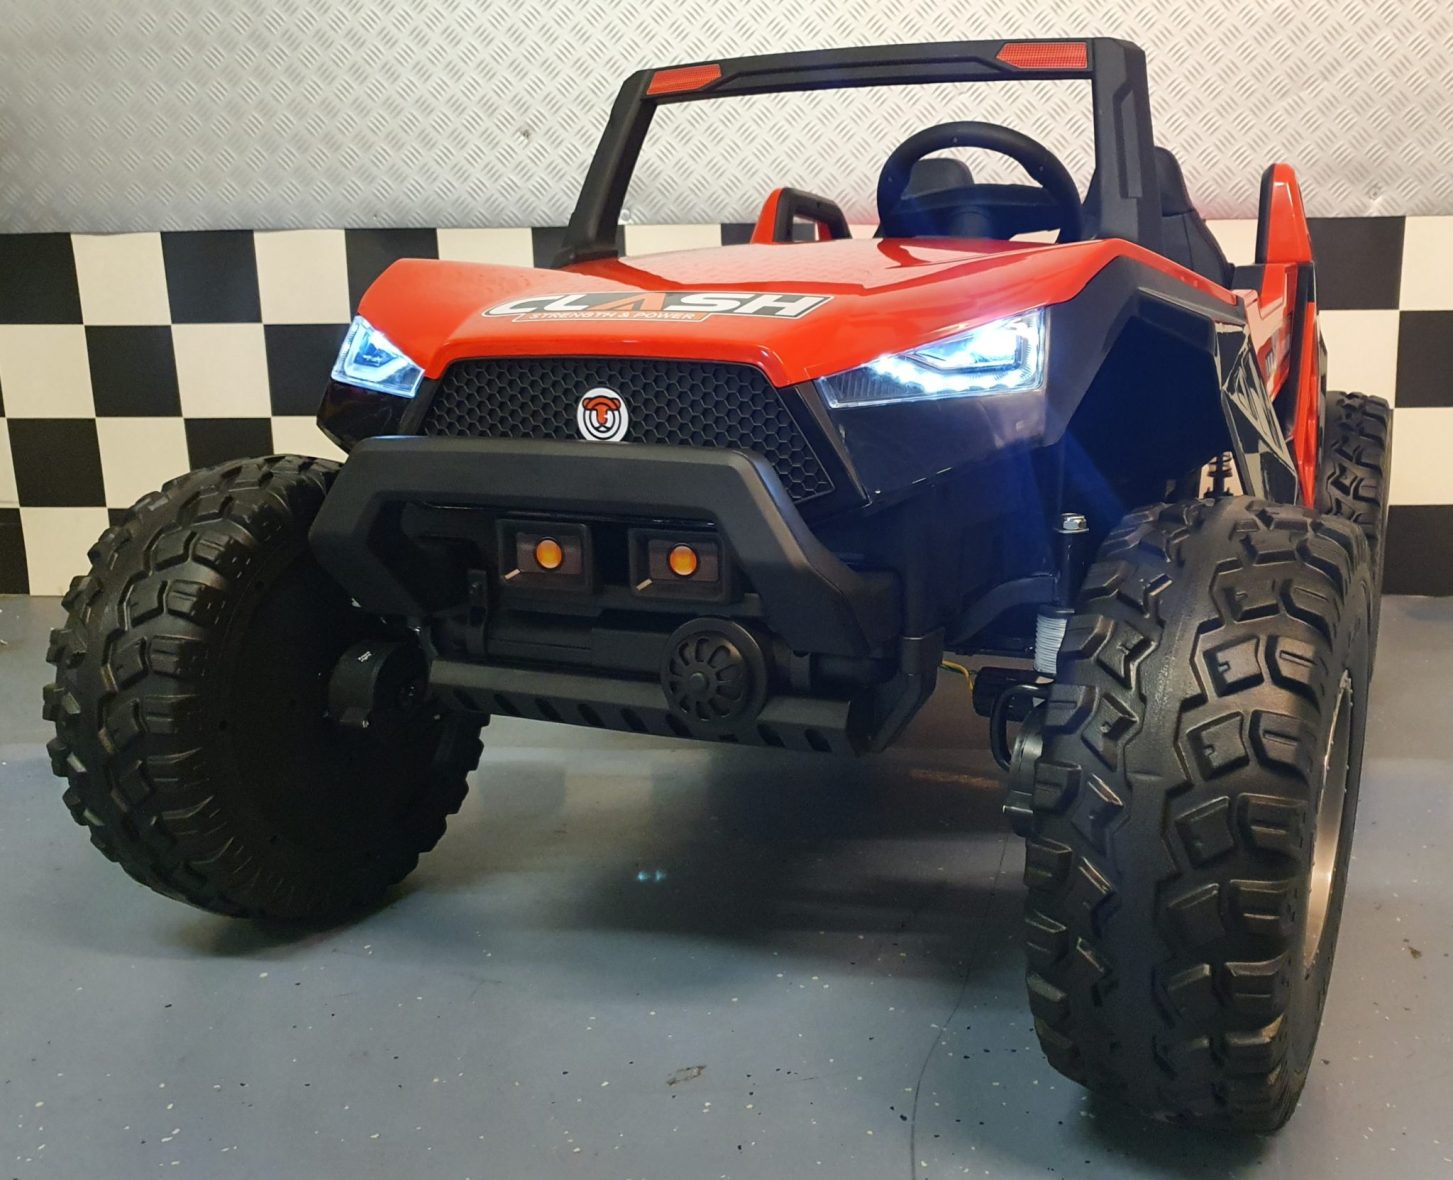 Power Buggy 24 Volts, 4 Wheel Drive with Rc for 2 Children